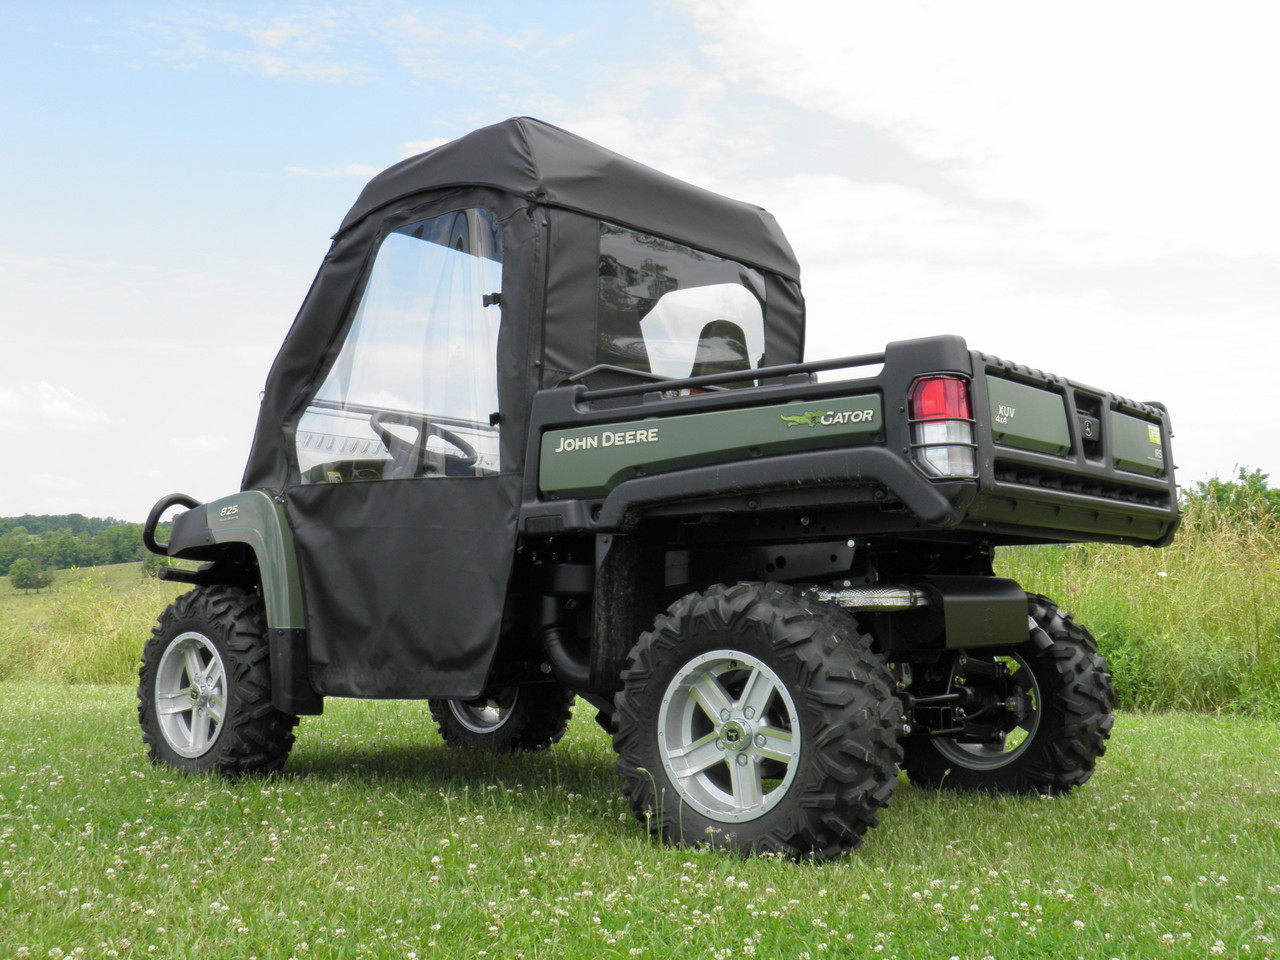 3 Star side x side John Deere HPX/XUV full cab enclosure with vinyl windshield rear angle view